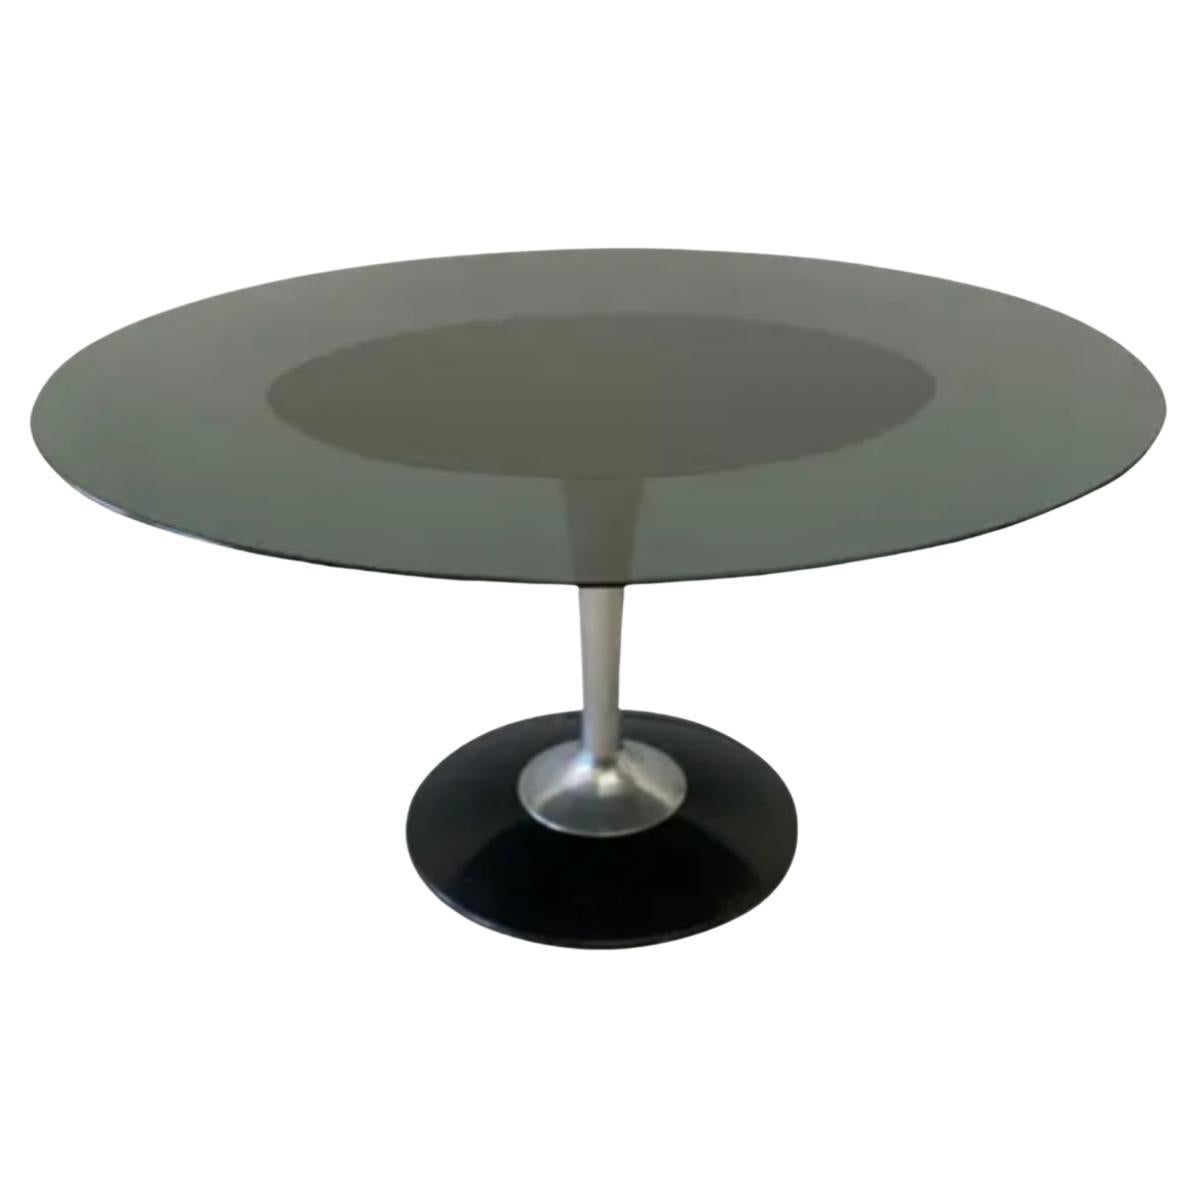 Chromecraft Smoked Glass and Lucite Oval Table (chairs already sold) For Sale